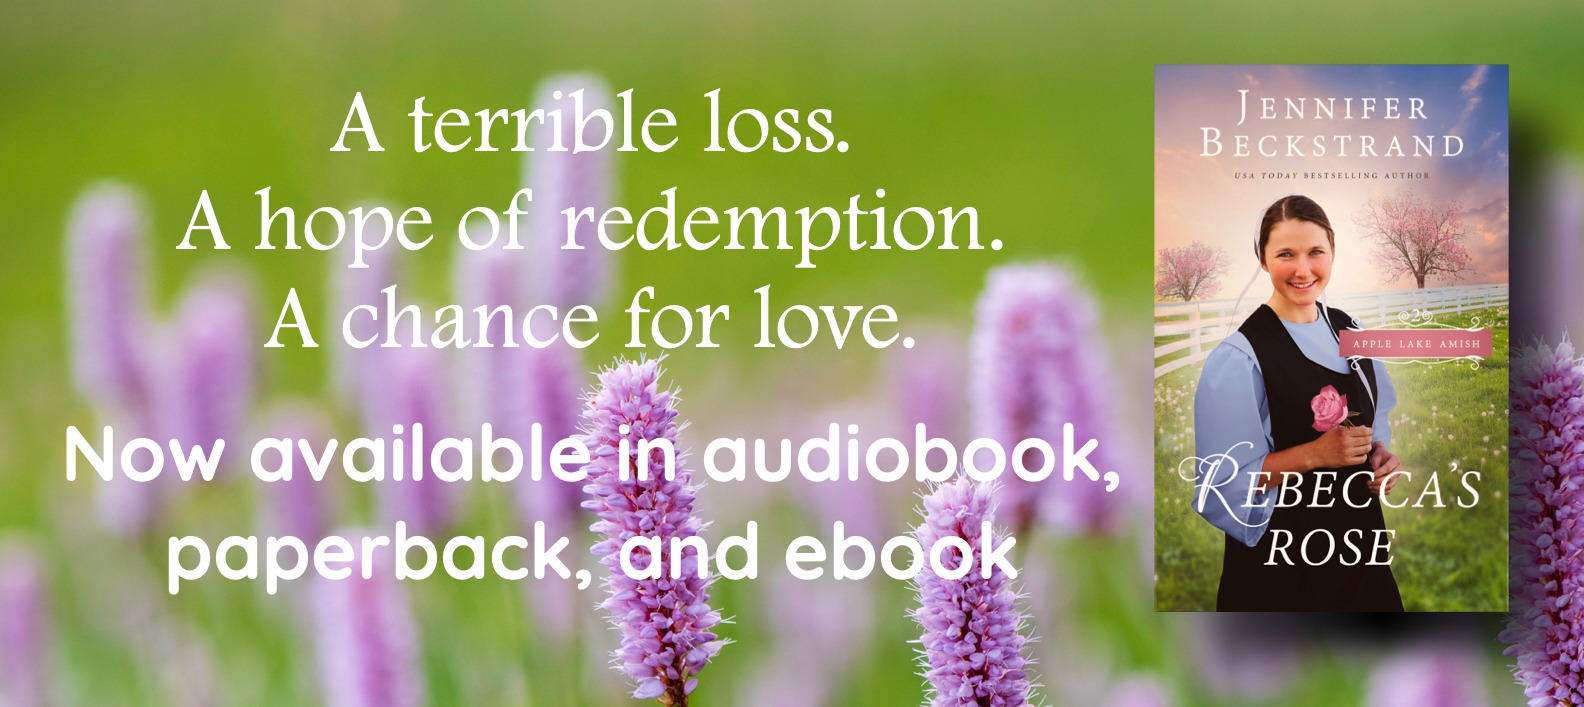 Rebeccas Rose available on audiobook